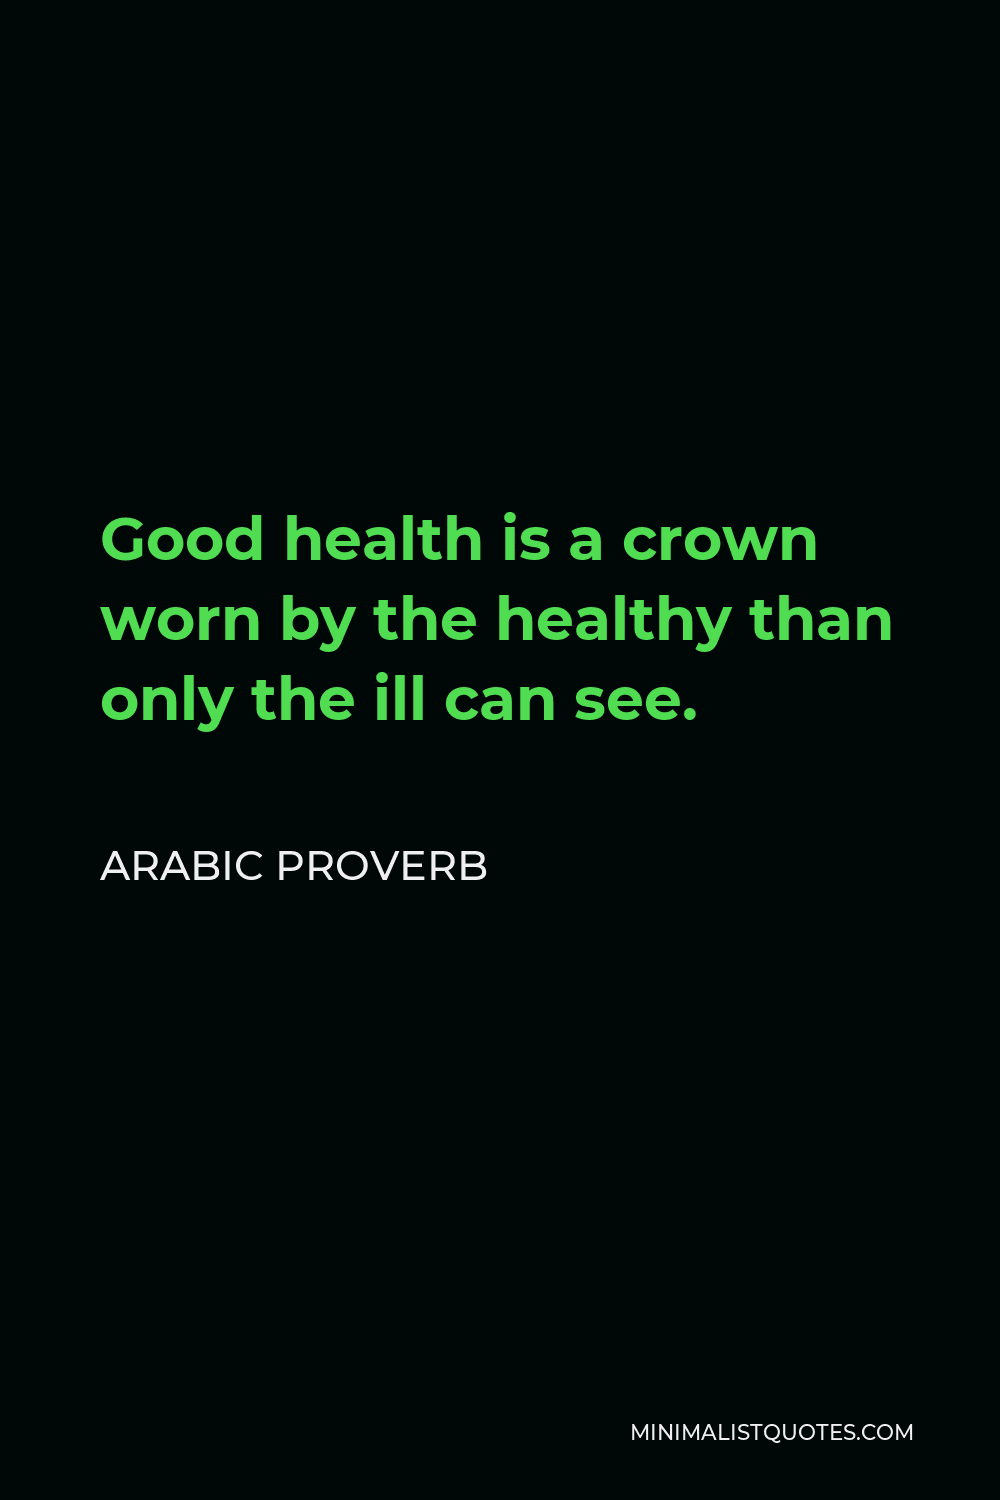 Arabic Proverb Quote - Good health is a crown worn by the healthy than only the ill can see.